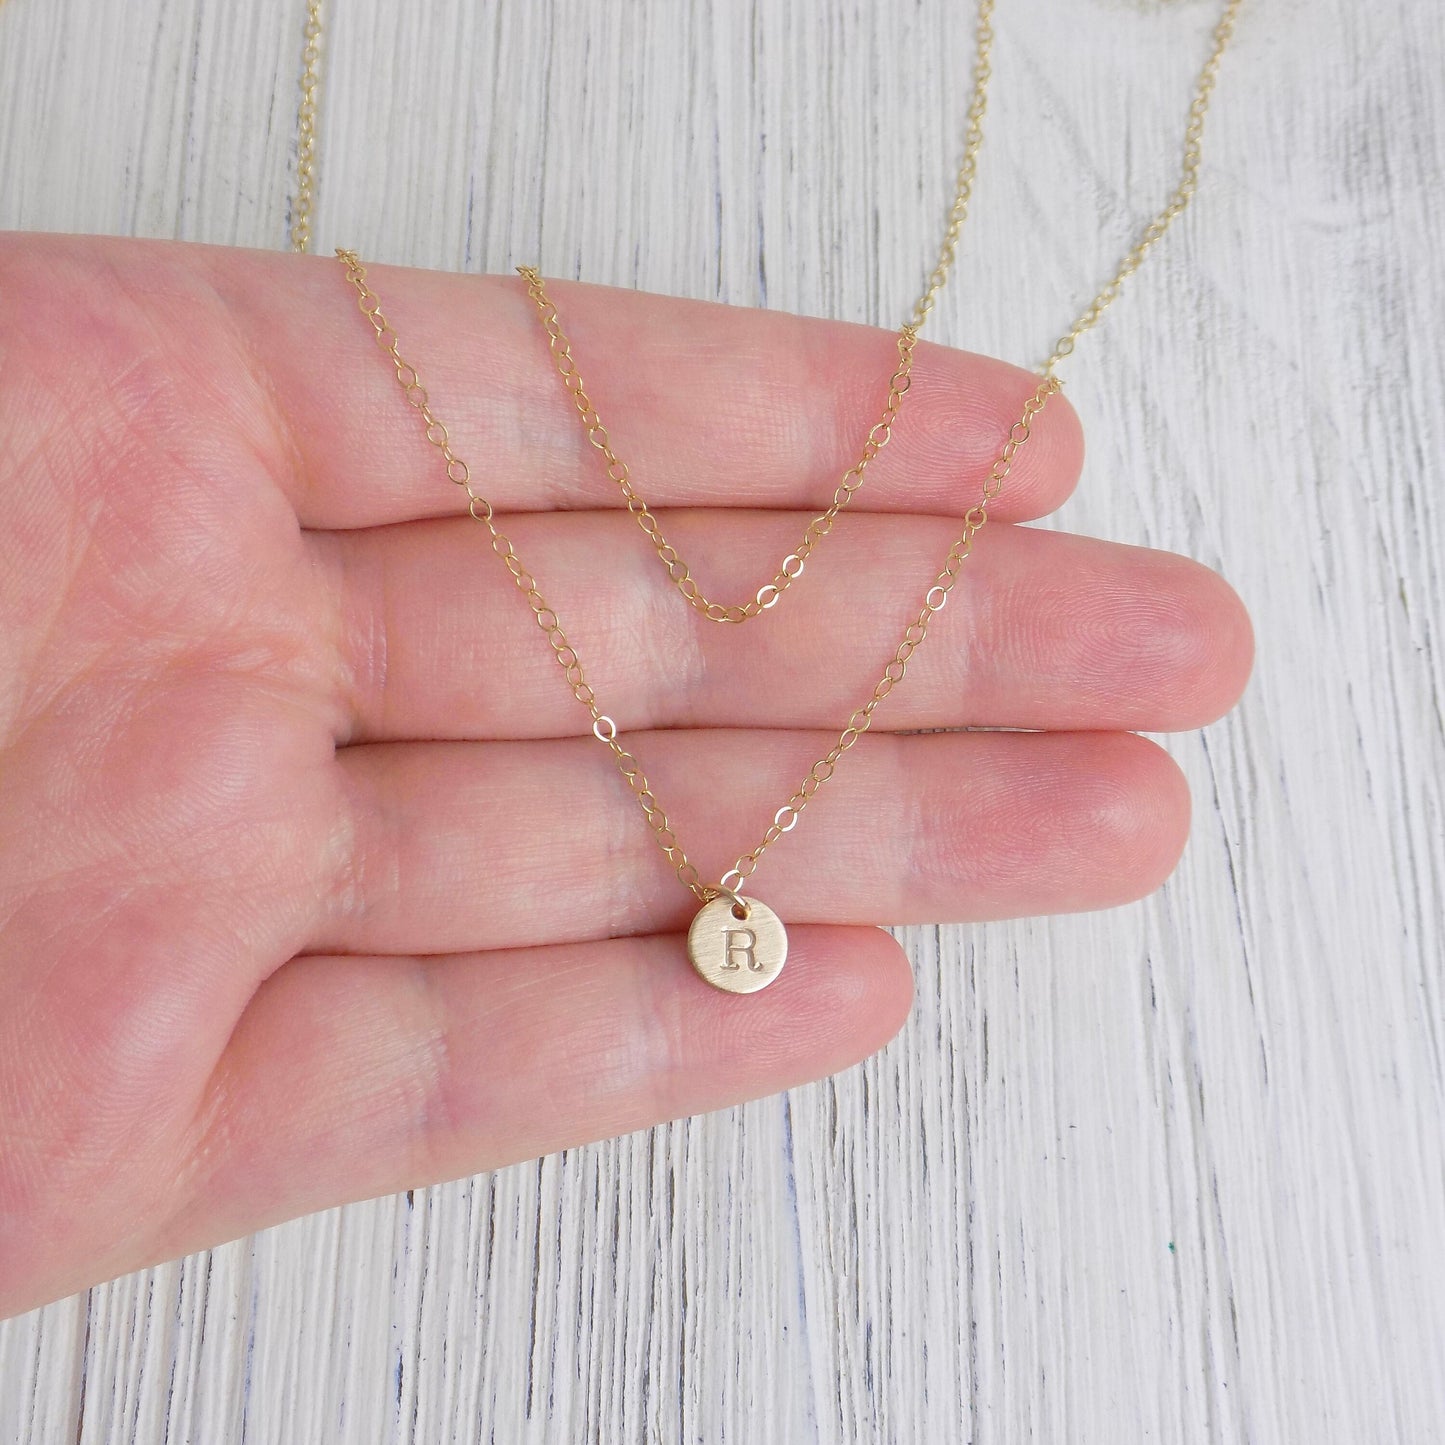 Layered Initial Necklaces For Women - Tiny Initial Necklace Brushed Matte Satin Finish 14K Gold Filled Personalized Initial - Christmas Gift